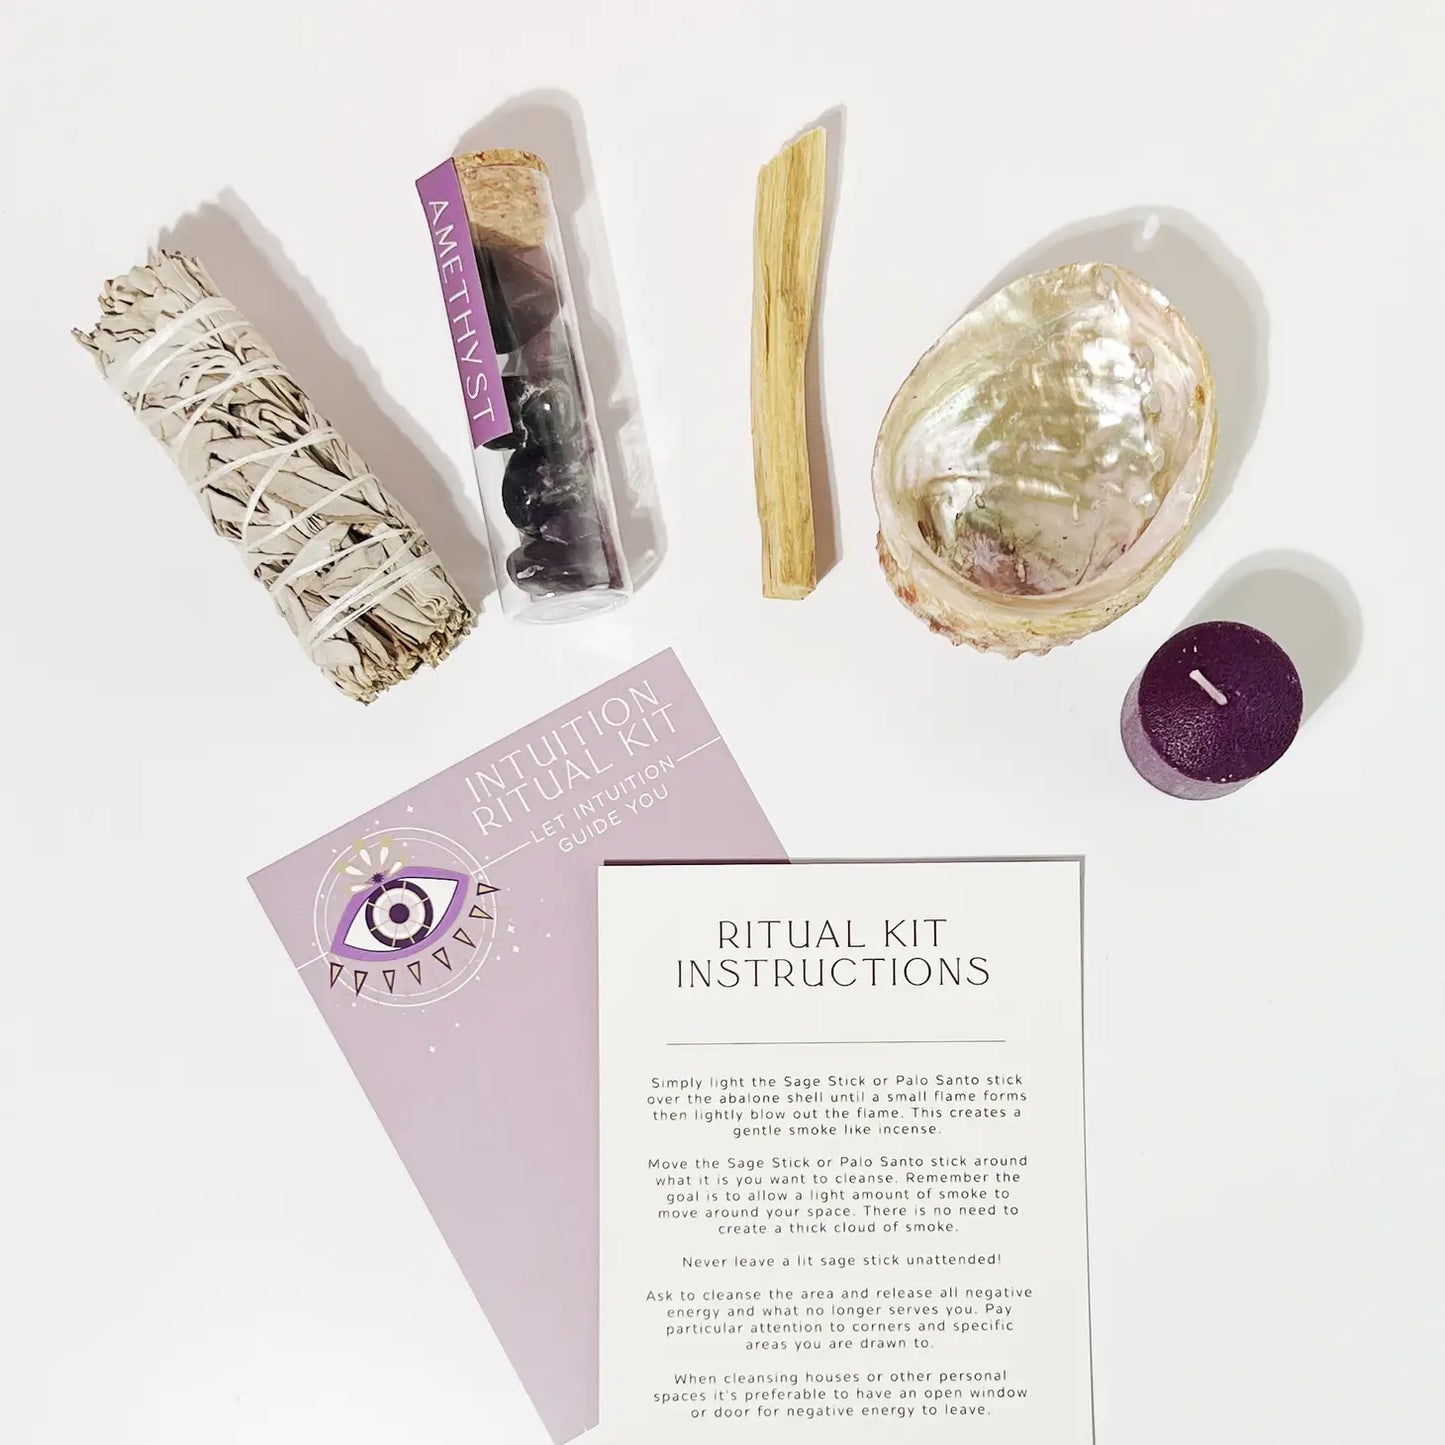 Intuition + Guidance Ritual Spell Kit Protection W/ Amethyst